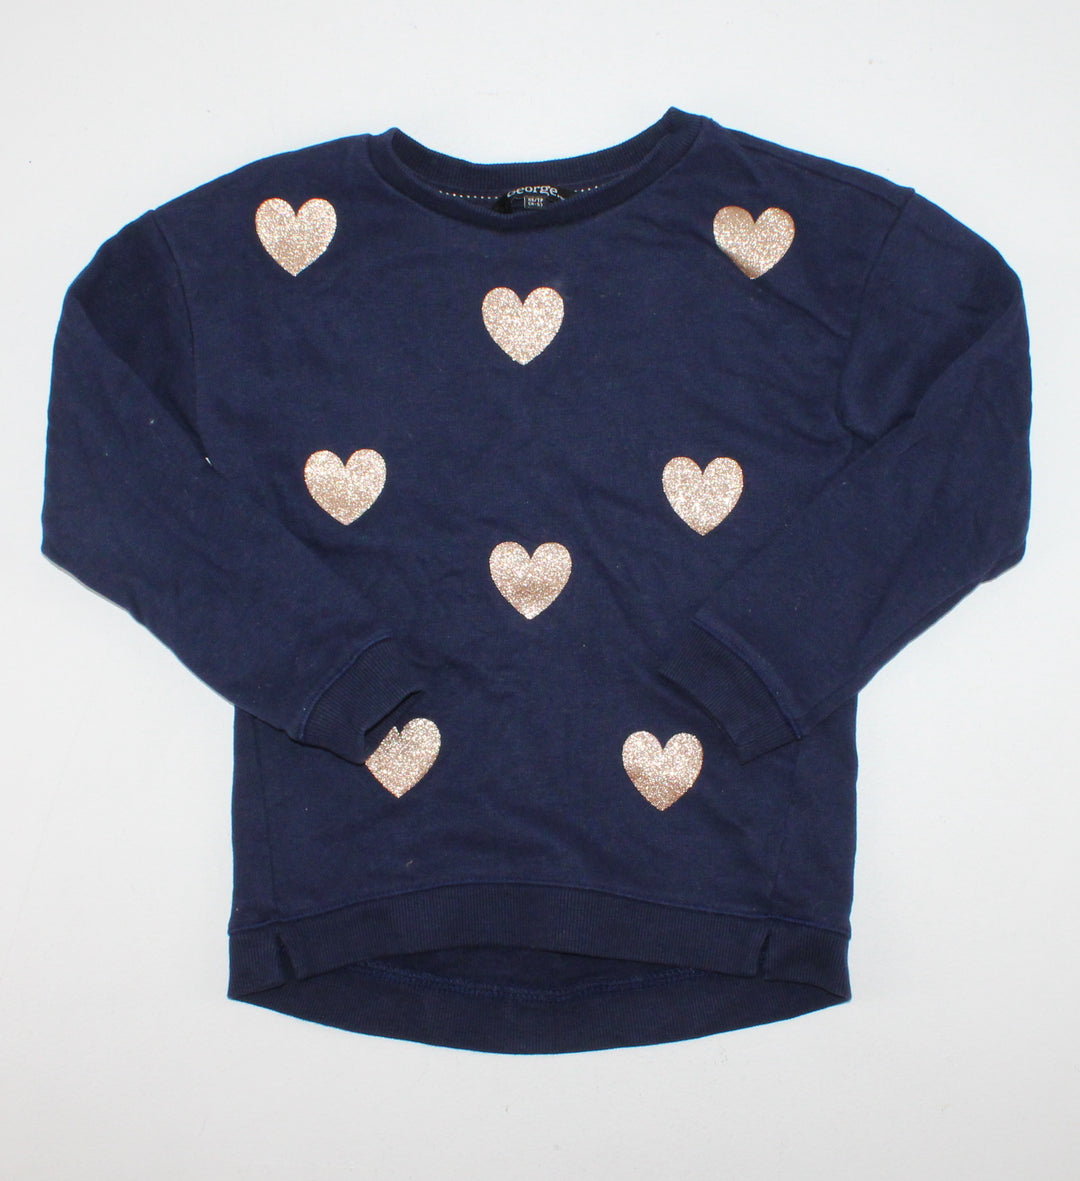 CARTERS NAVY GOLD SWEATER 4-5Y EUC